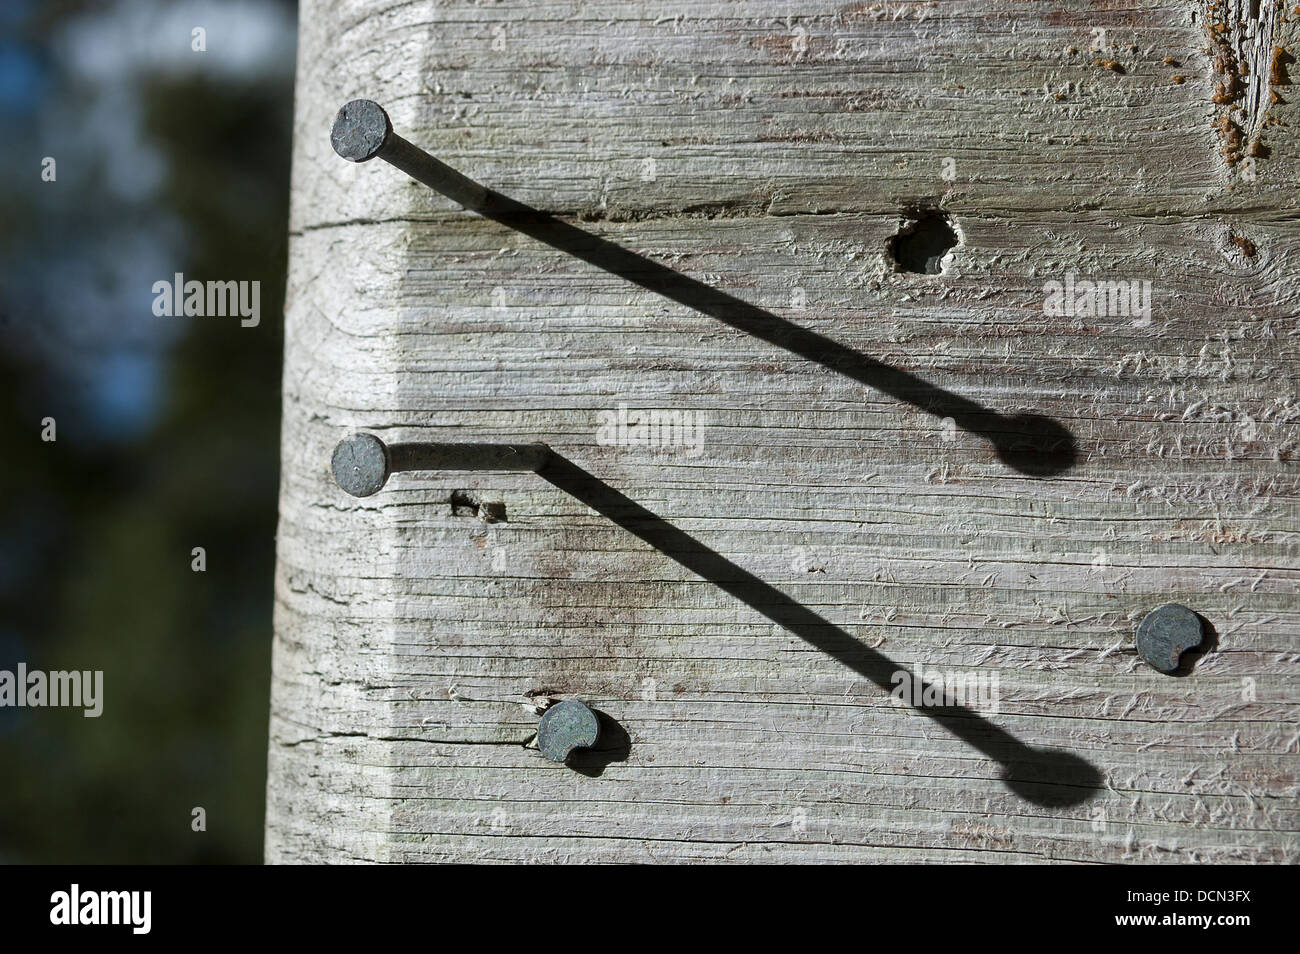 Two nails in a board cast long shadows Stock Photo - Alamy